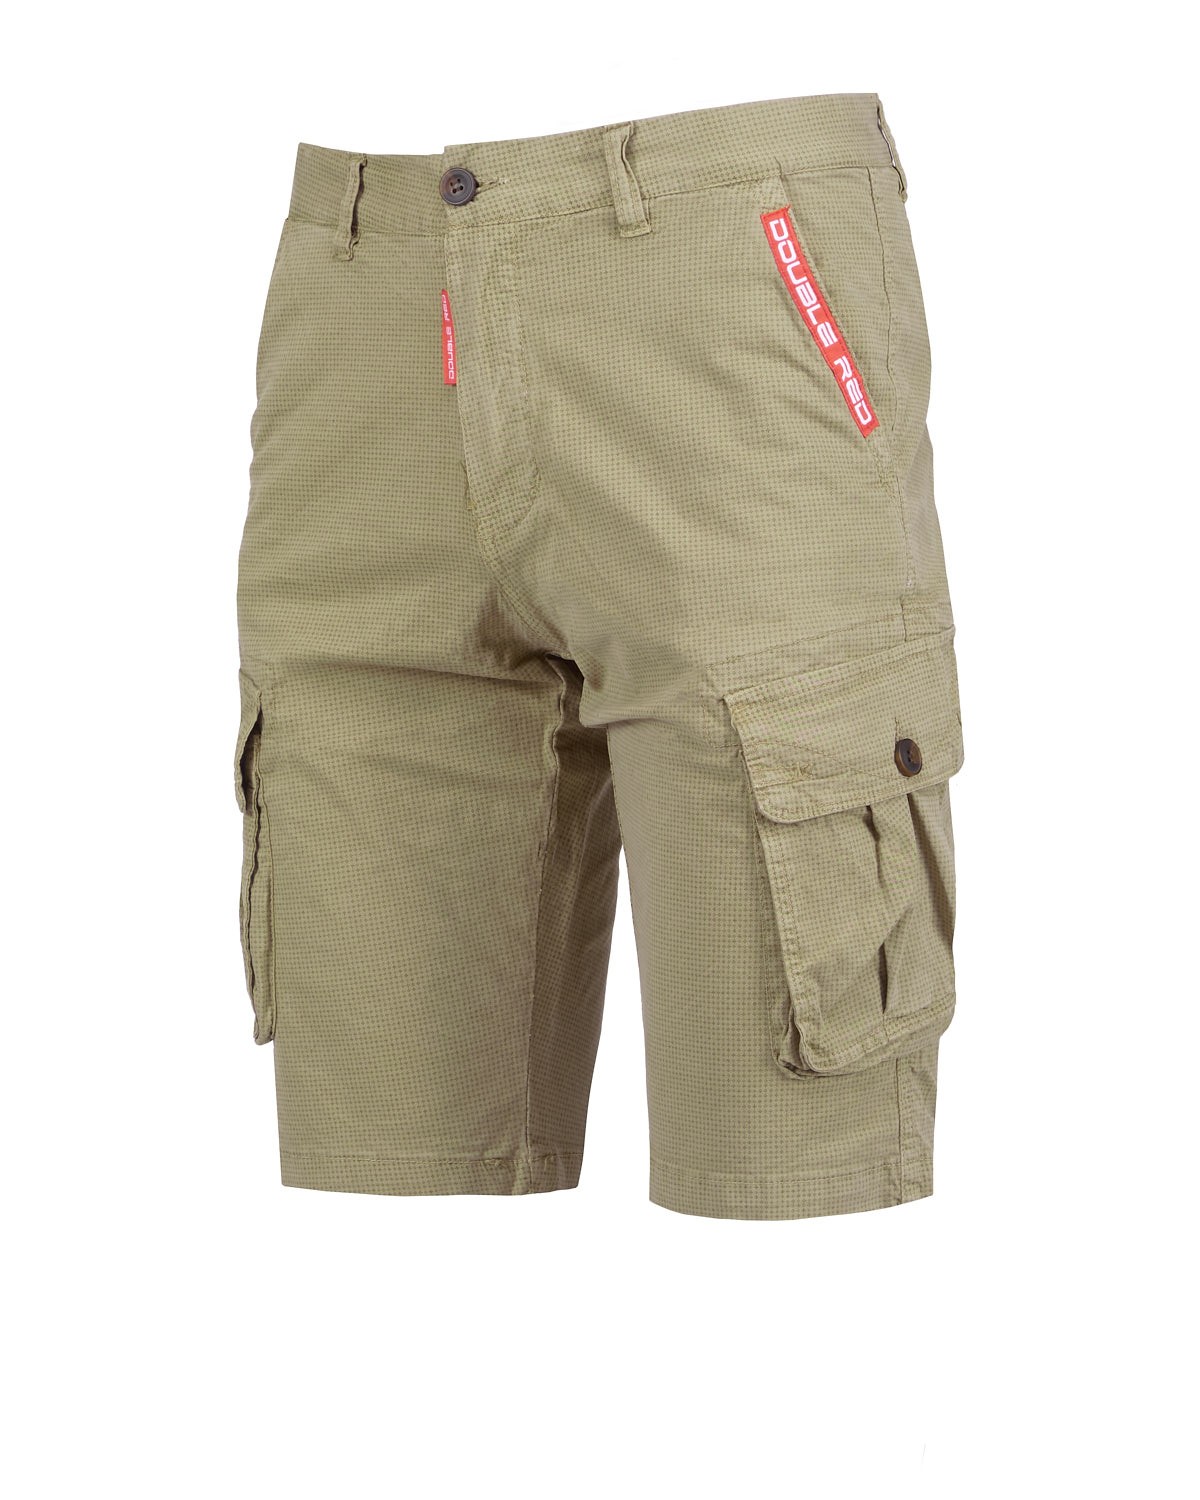 SQUERS Shorts Desert Red - Double